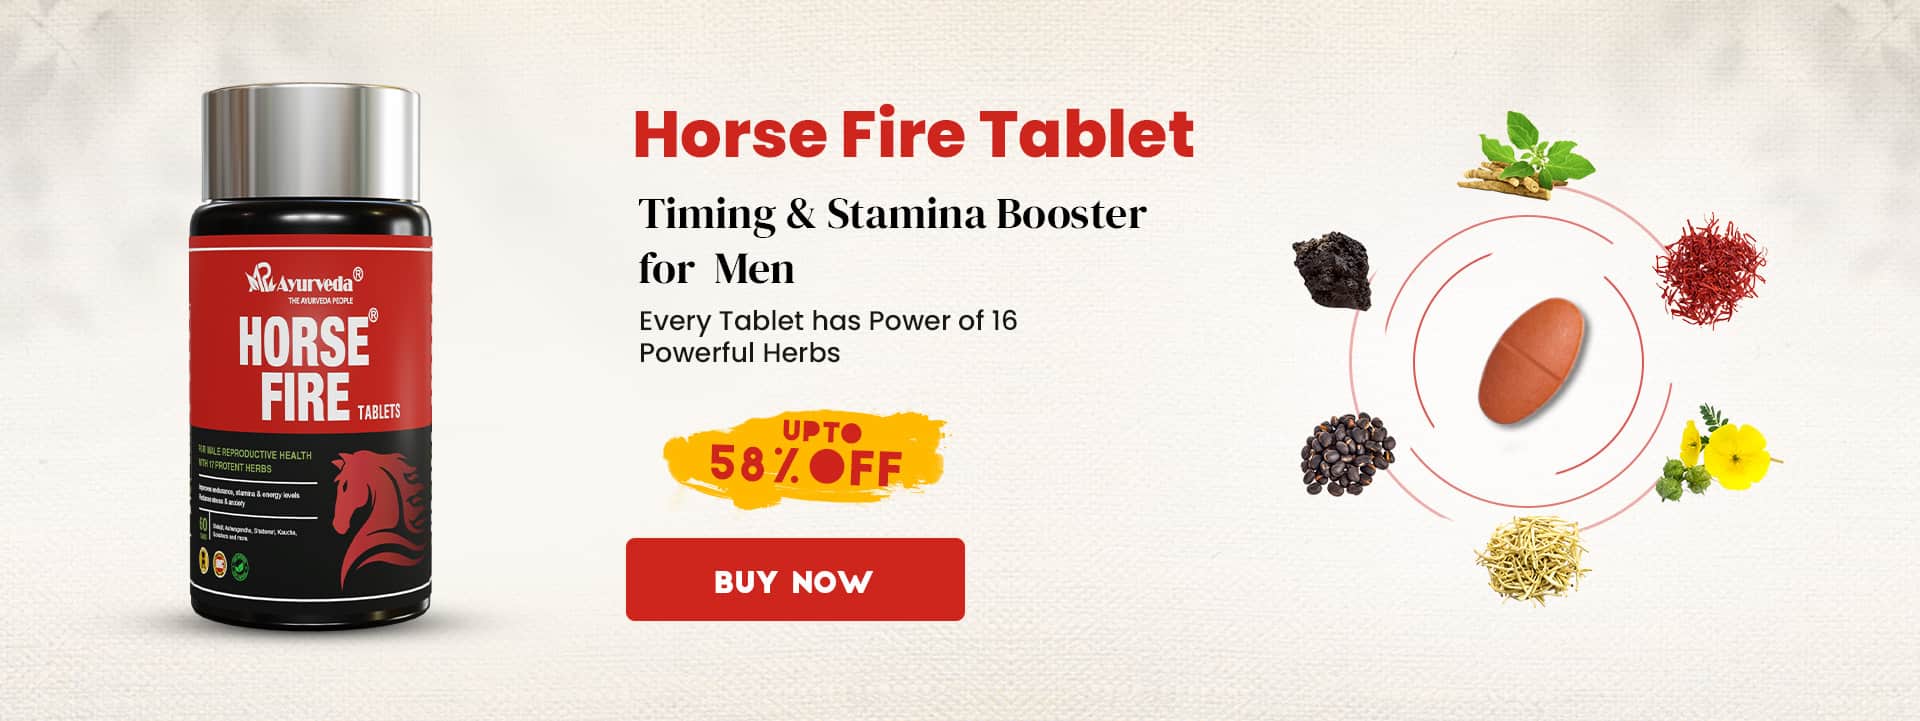 Horse Fire Tablet